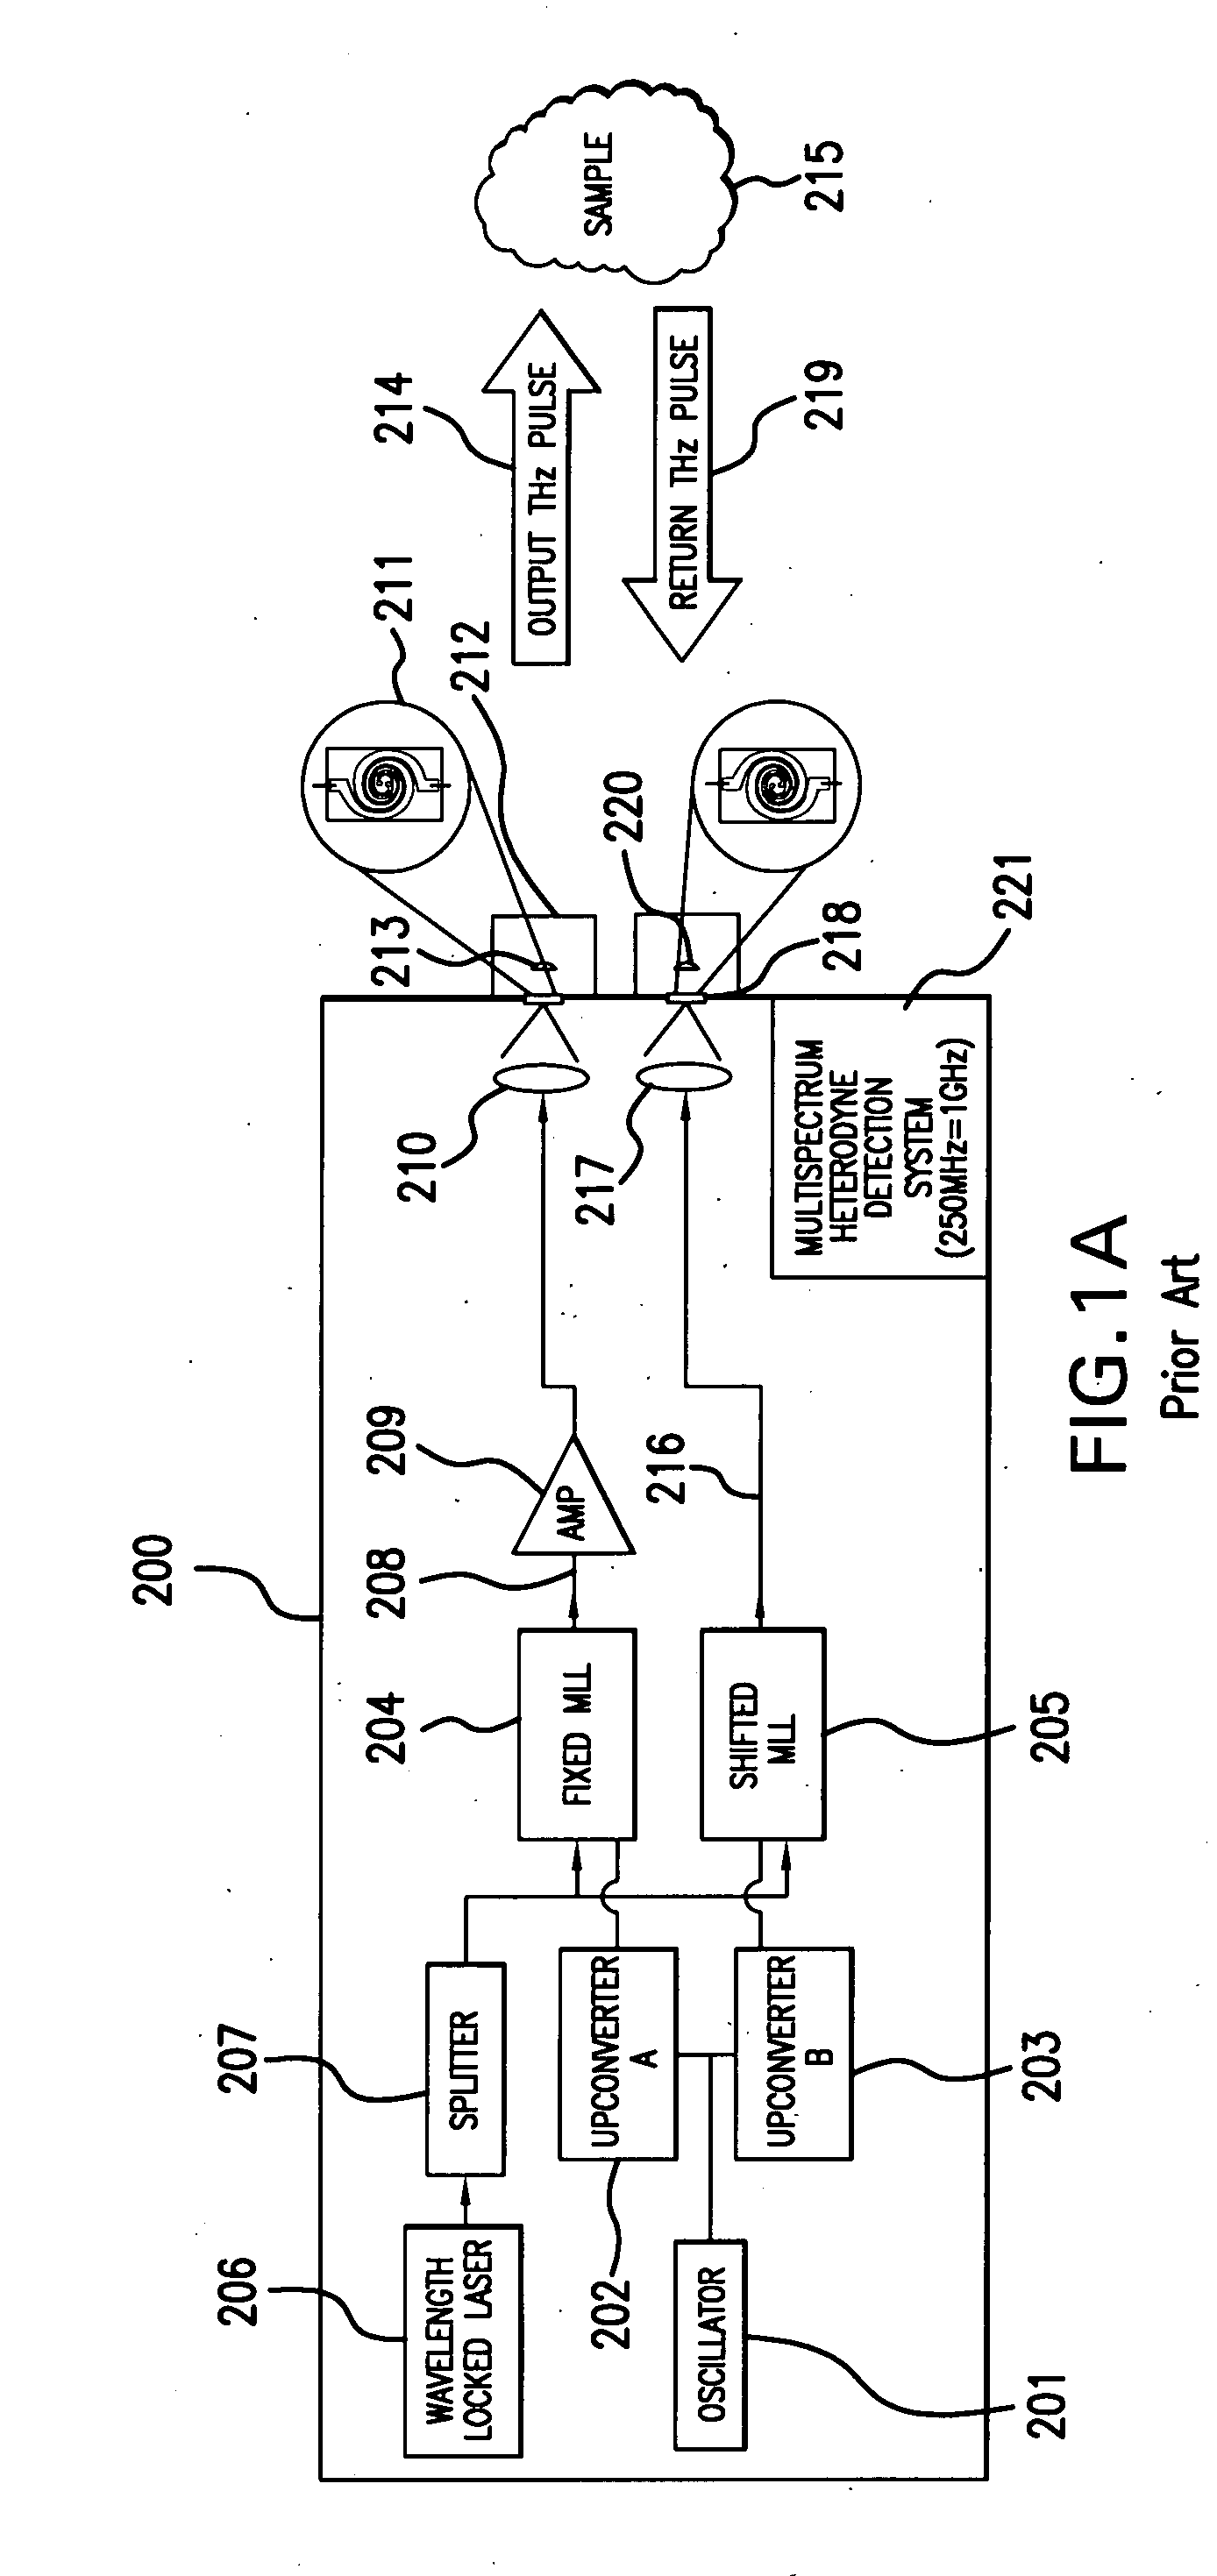 Pulsed terahertz frequency domain spectrometer with single mode-locked laser and dispersive phase modulator